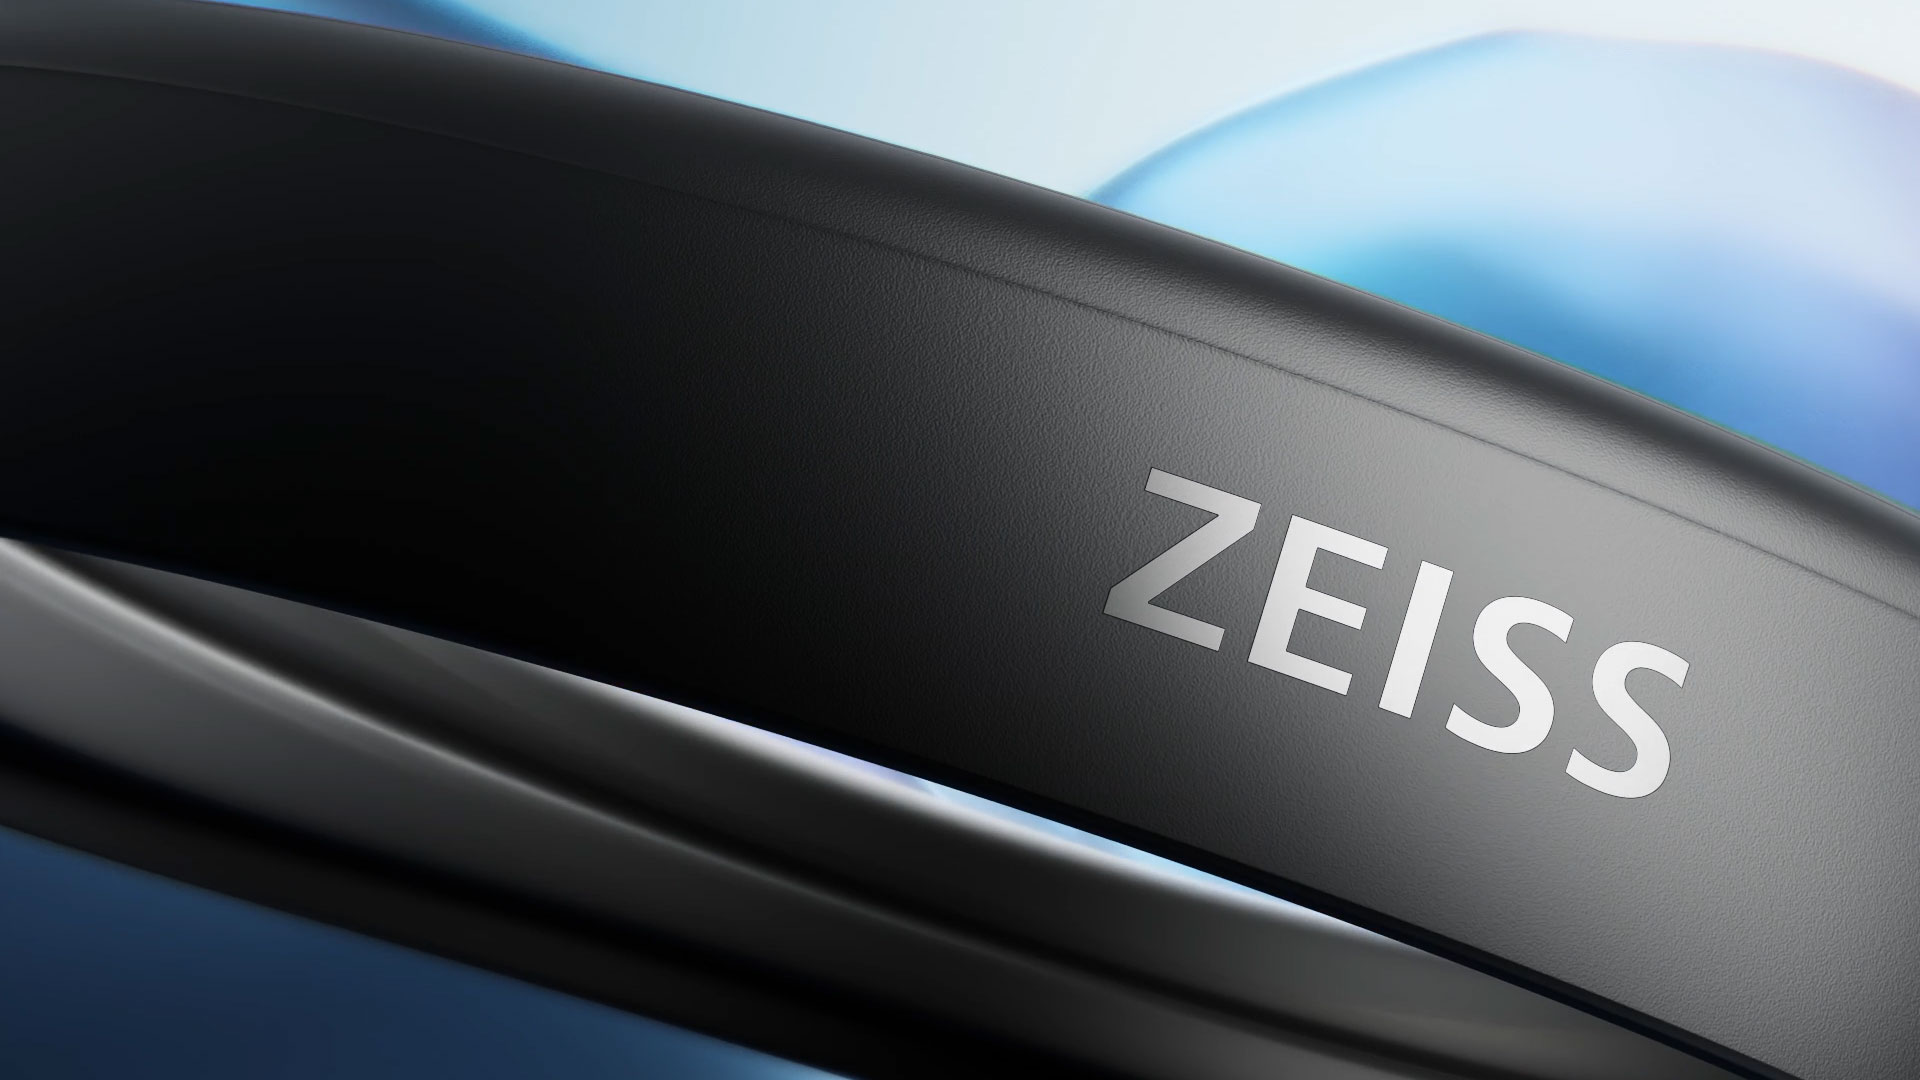 ZEISS is delighted to be working with Athena